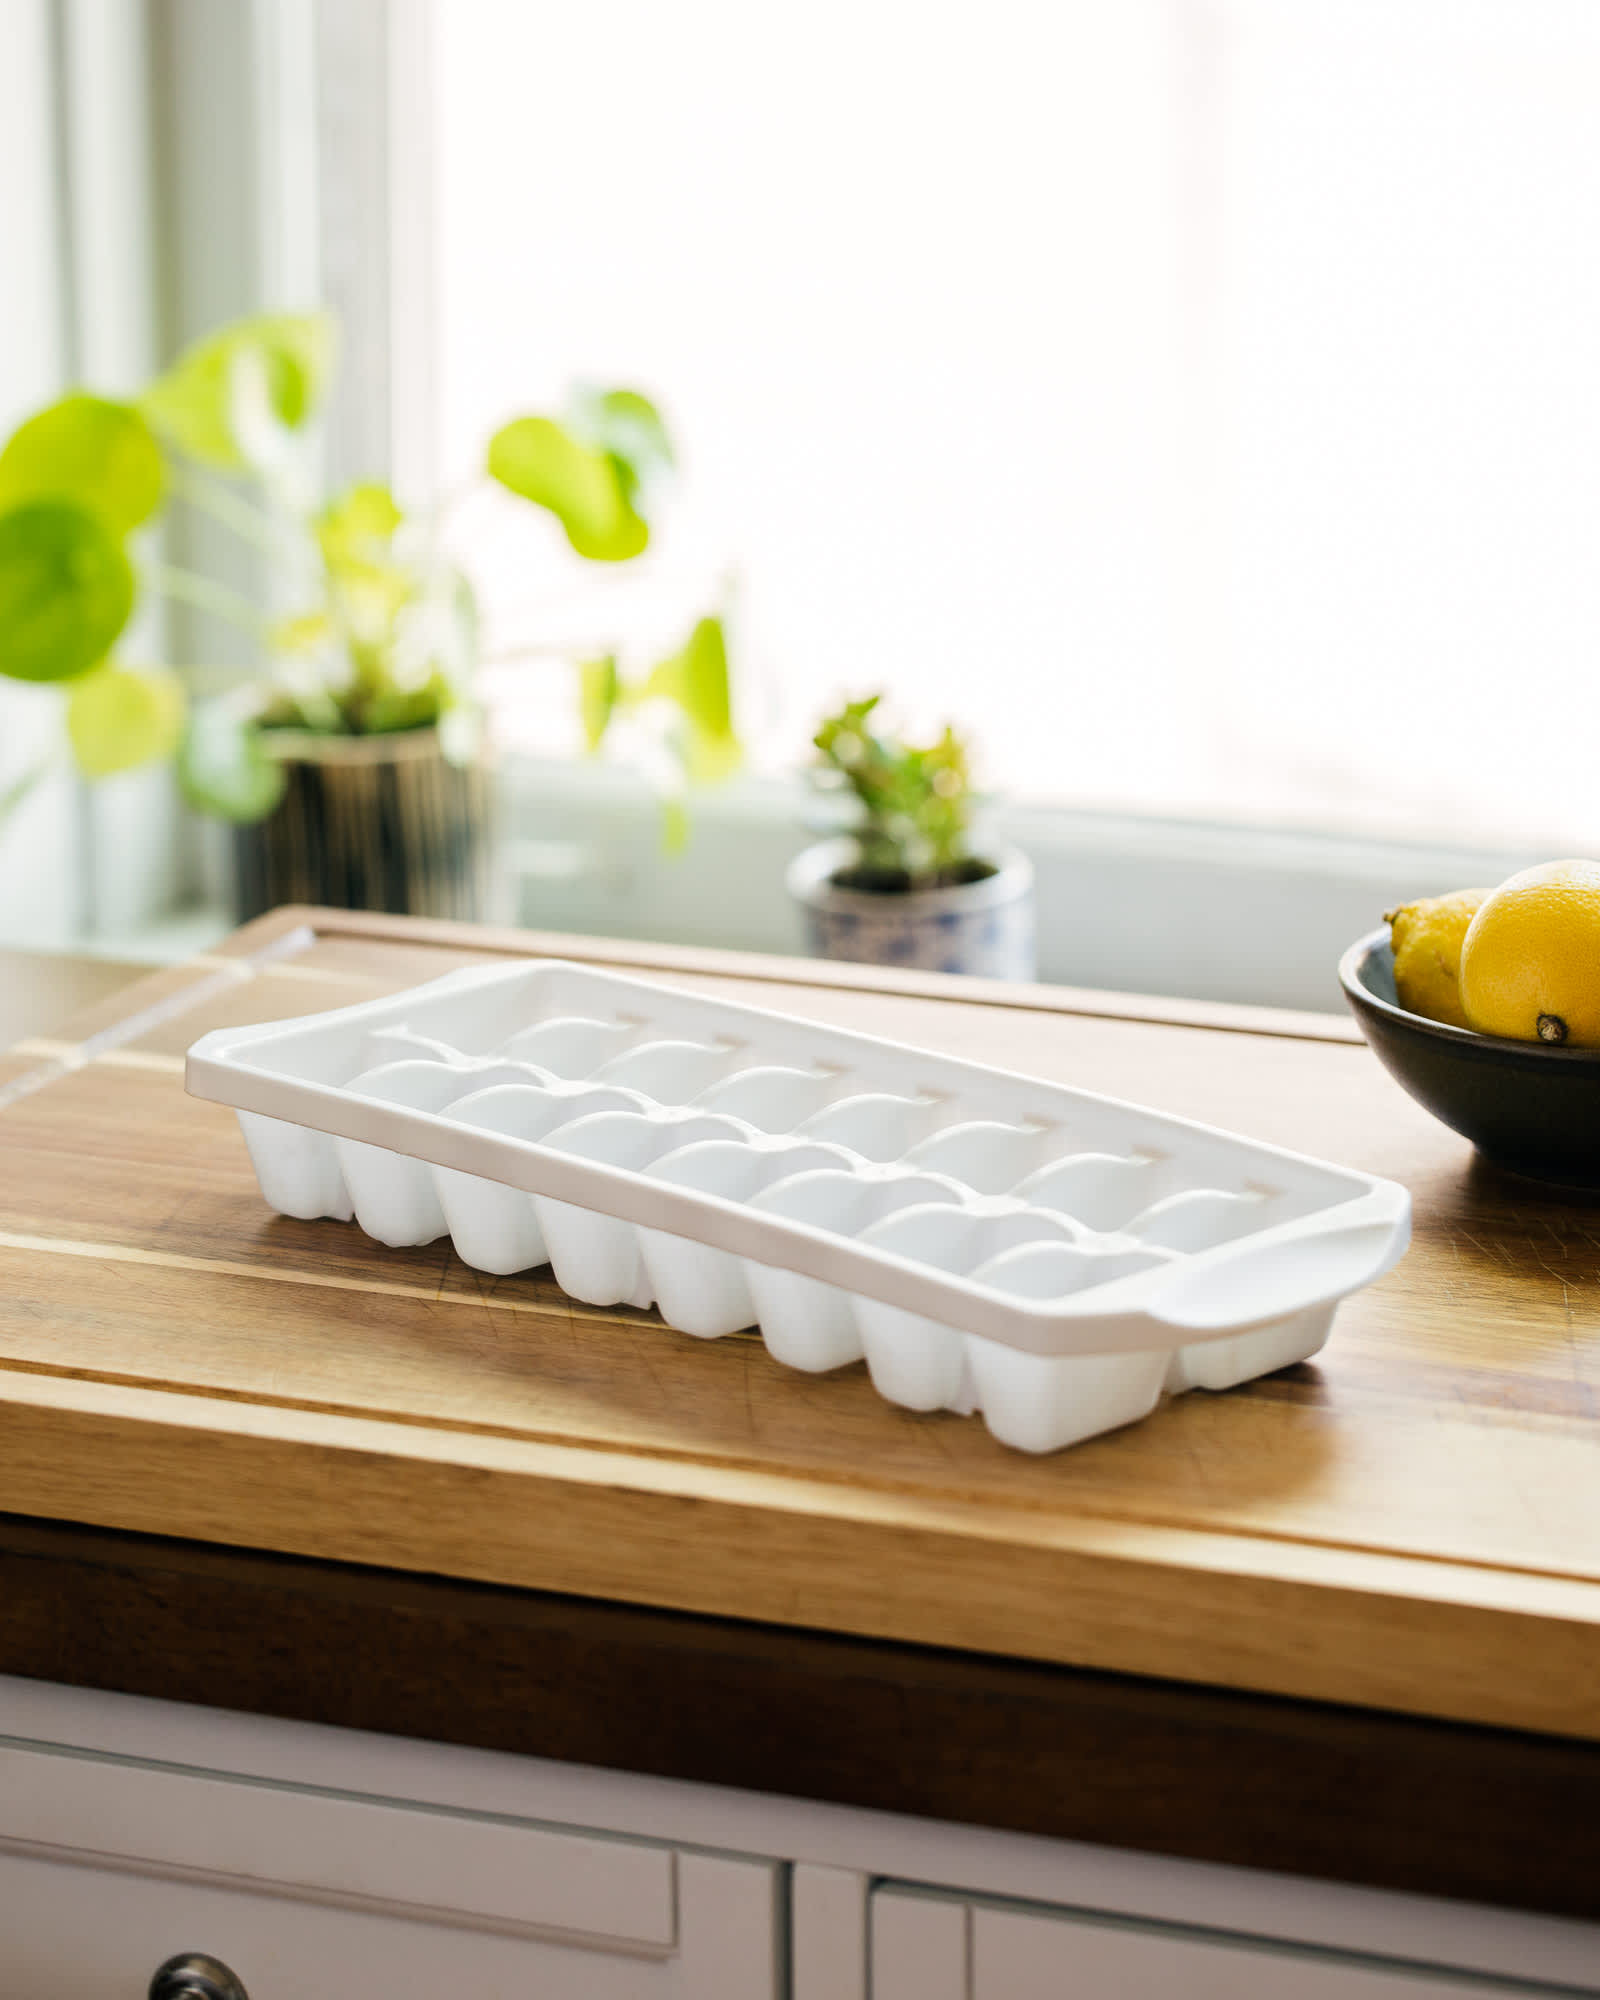 You don't have to fill ice cube trays to the top!” On traditions